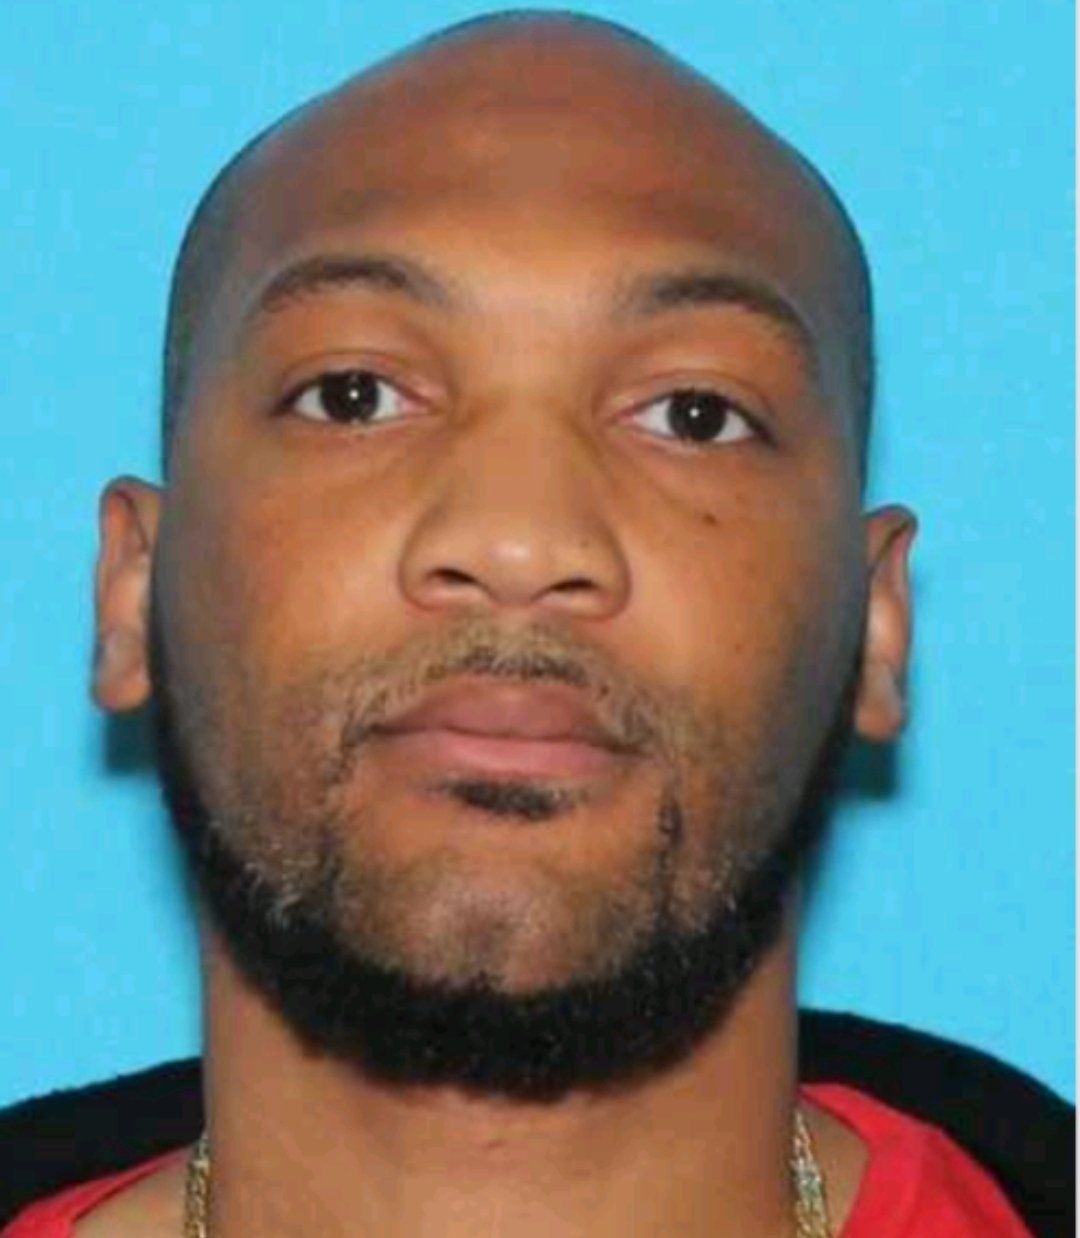 Yaqub Talib, ex-NFL star Aqib’s brother, named suspect in youth coach Mike Hickmon’s killing